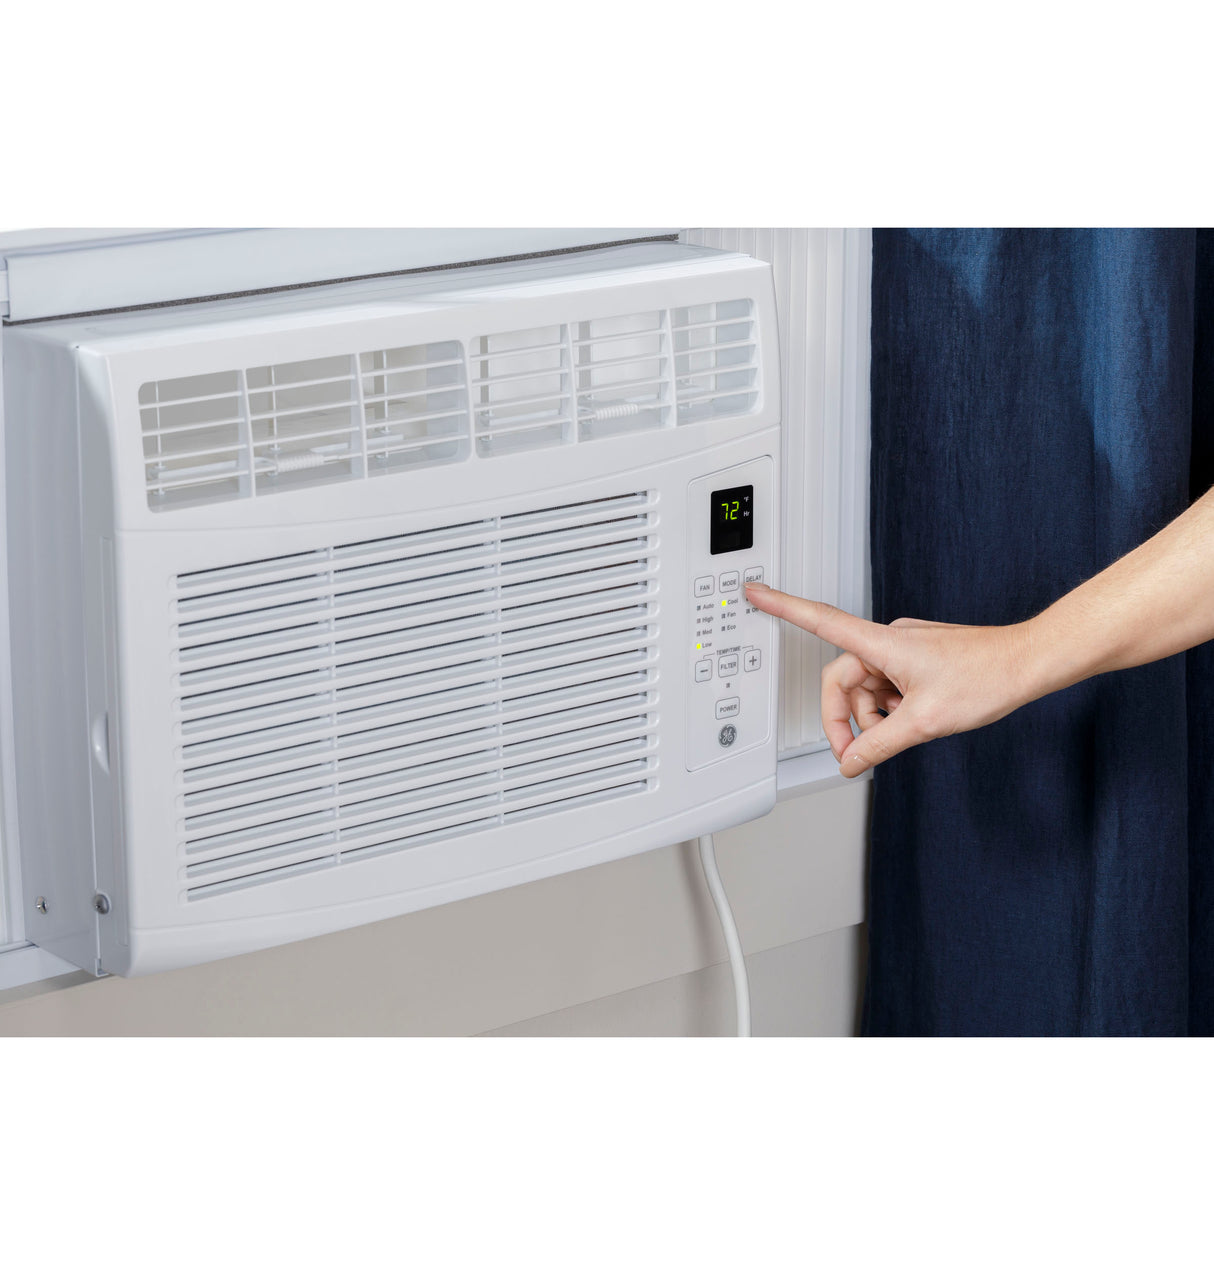 GE(R) 6,000 BTU Electronic Window Air Conditioner for Small Rooms up to 250 sq ft. - (AHQ06LZ)